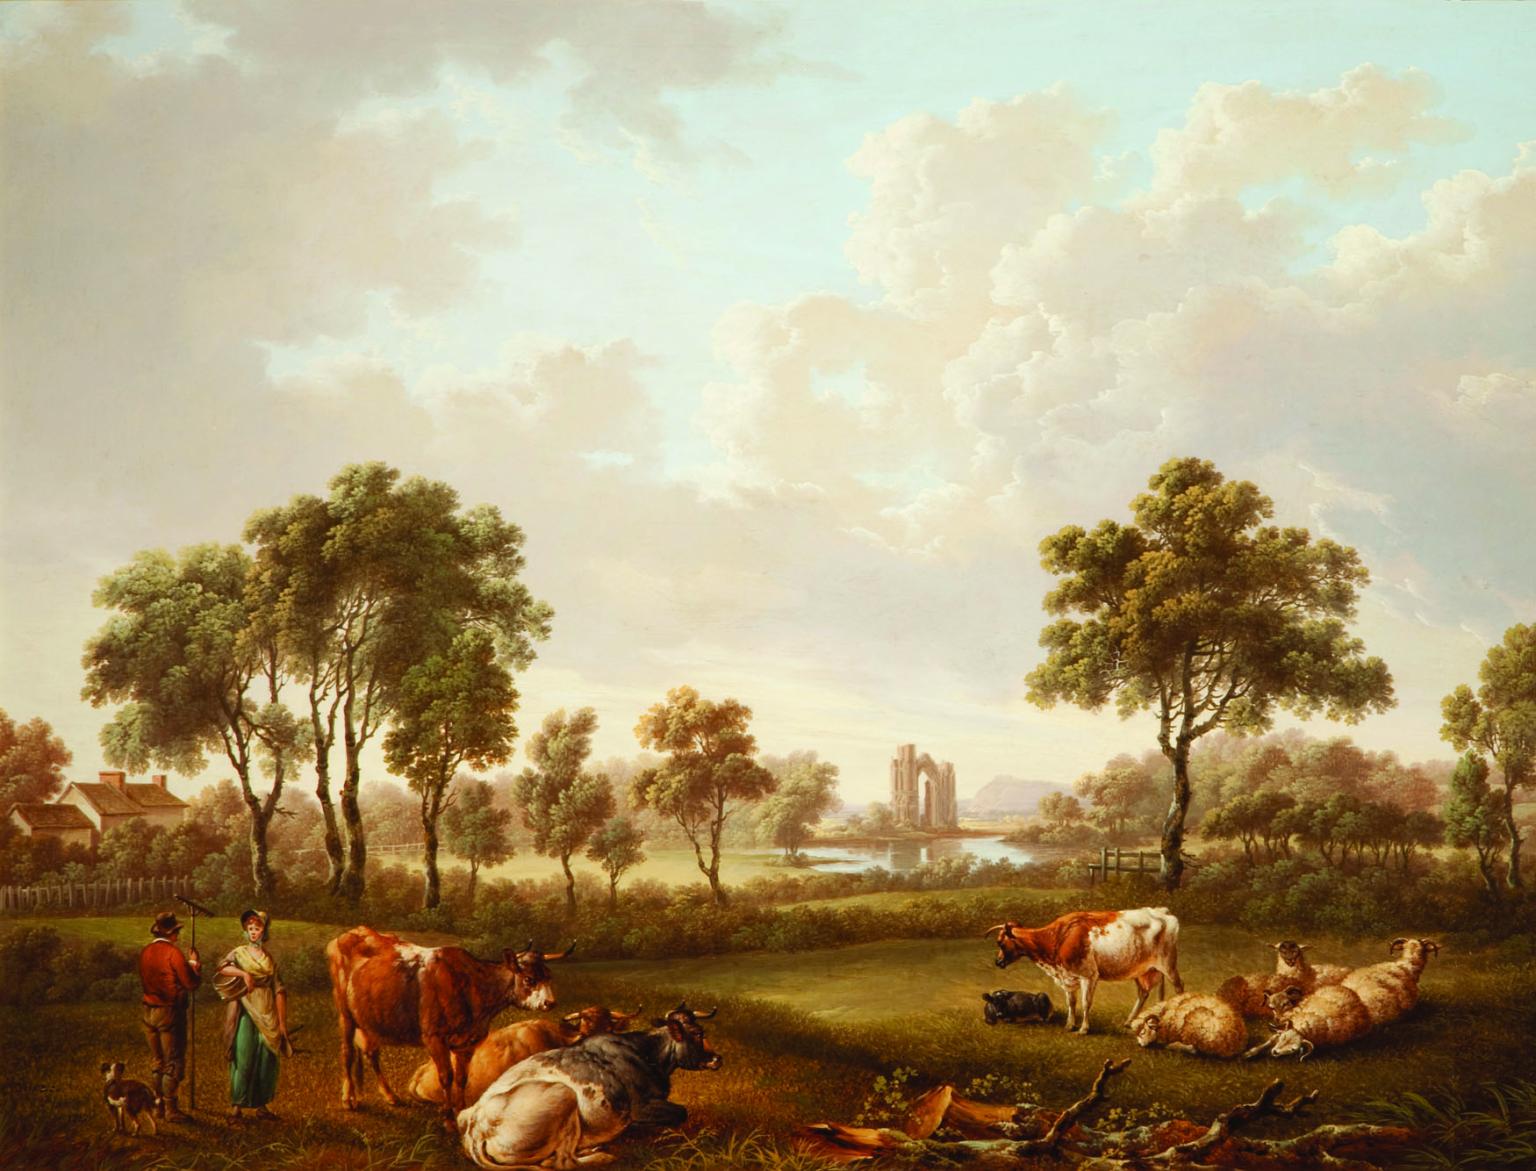 Rural landscape painting with house and lake in the background, and cows, a man, a woman, and a dog in the foreground.